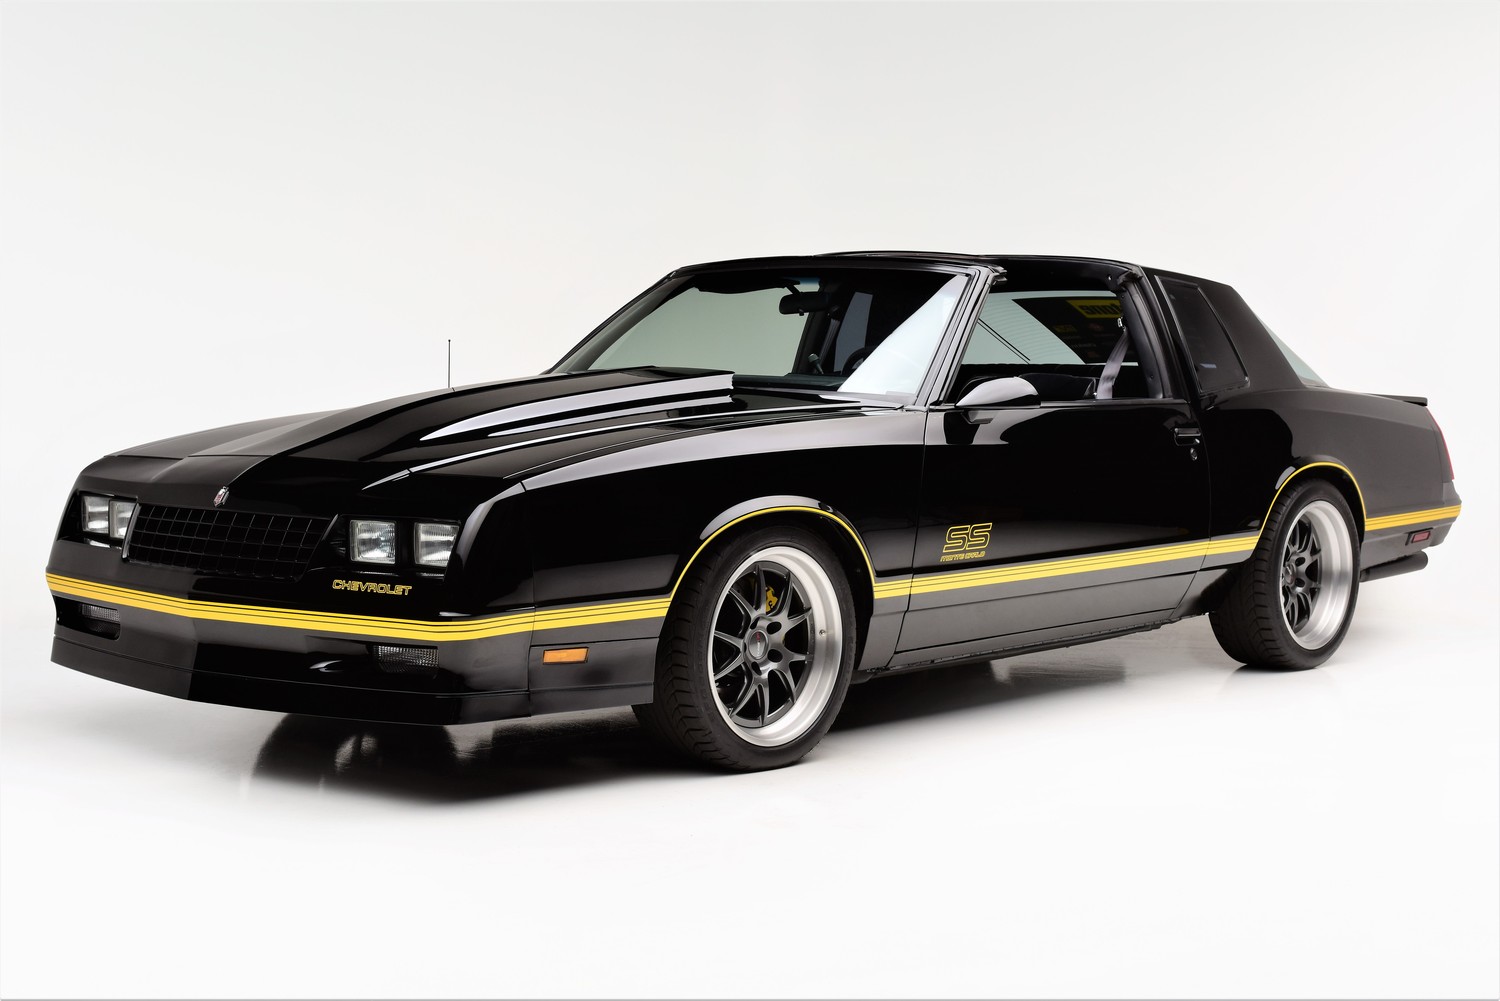 Resto Mod Chevy Monte Carlo To Be Sold By Barrett Jackson To